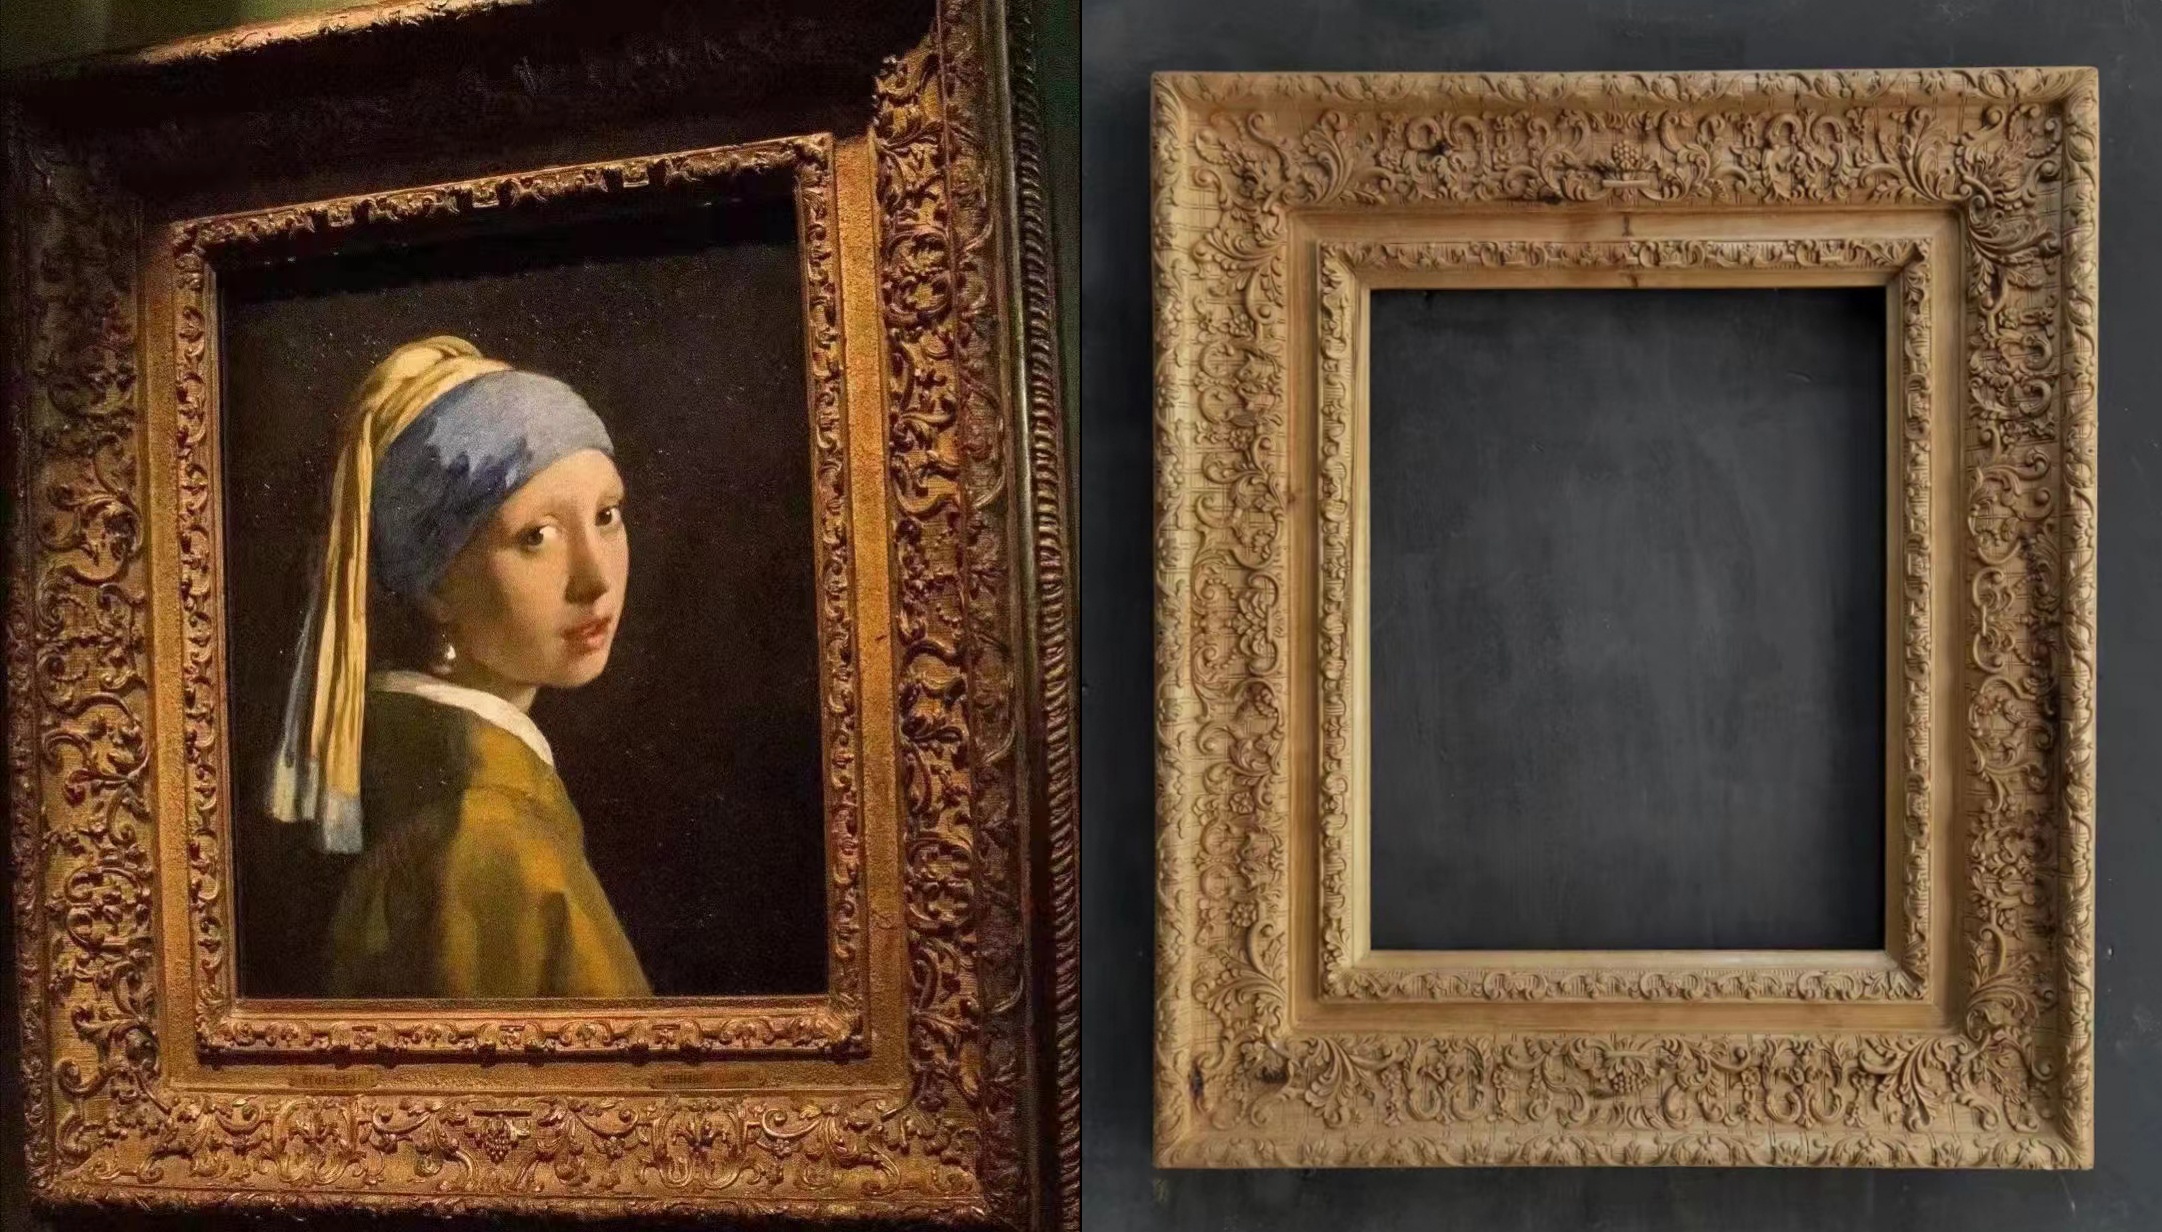 A Copy of the Museum's Original Frame for the Artwork "Girl with a Pearl Earring"